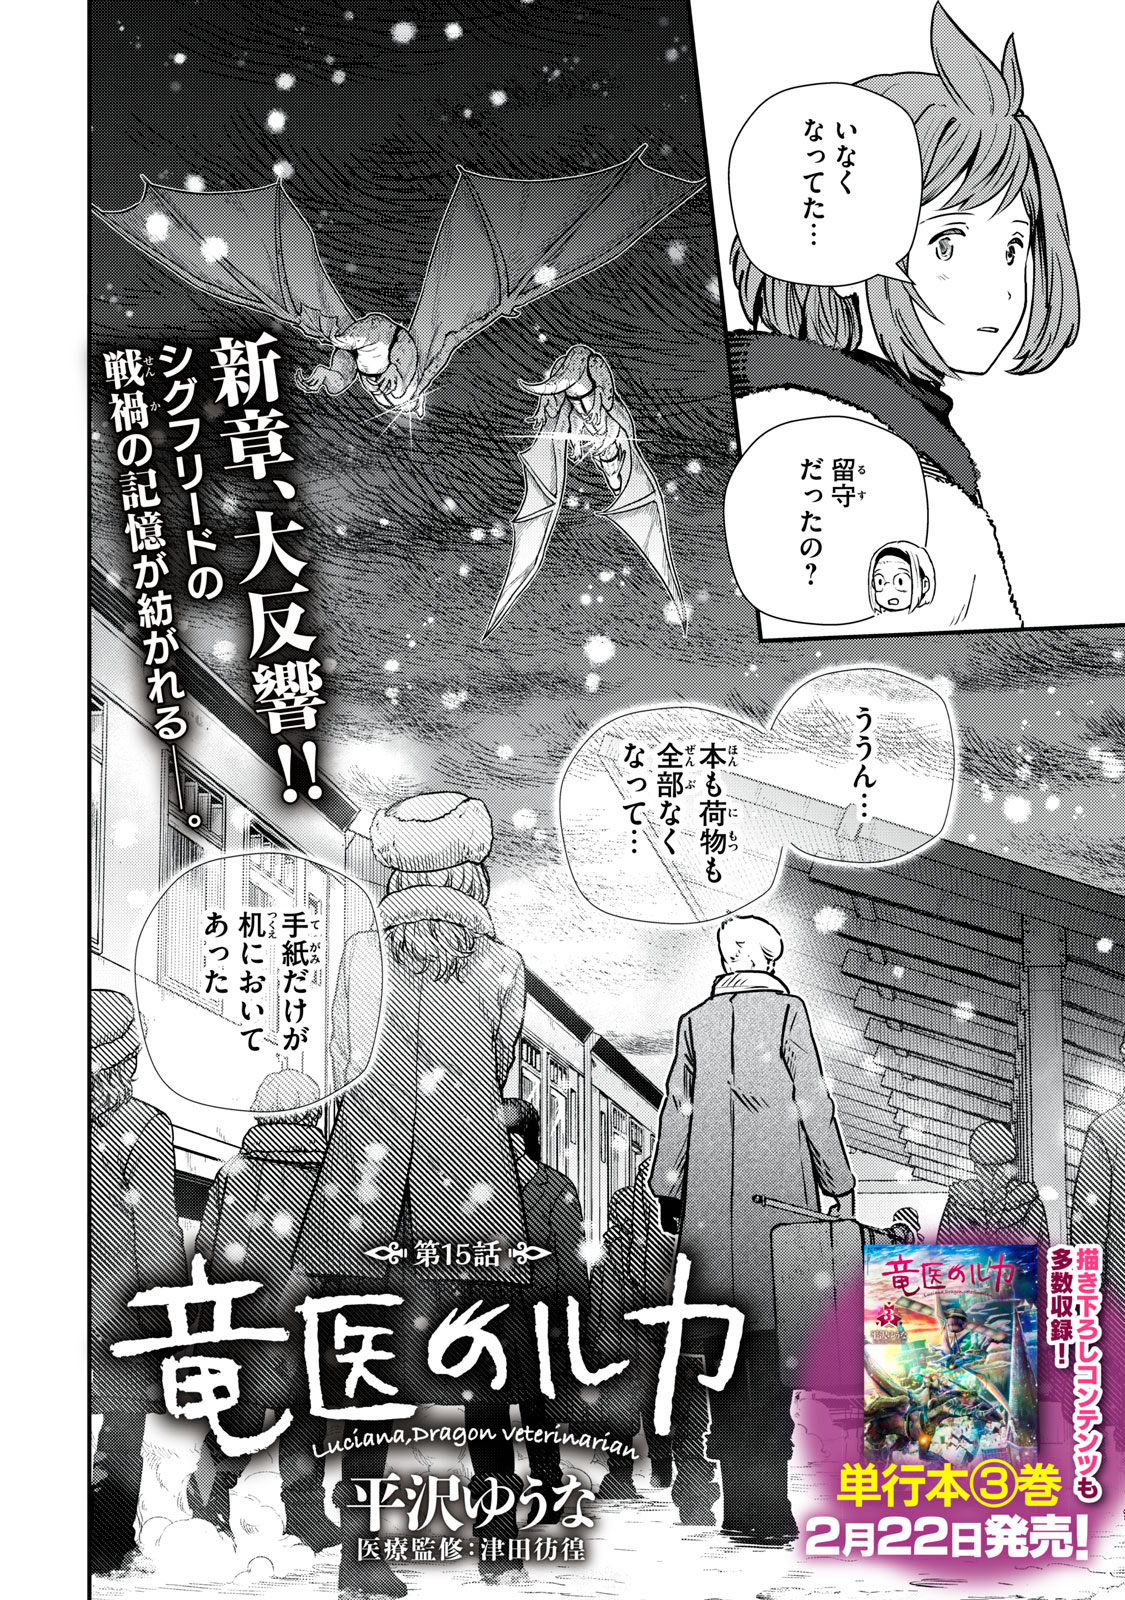 Ryuui no Luca - Chapter 15 - Page 2